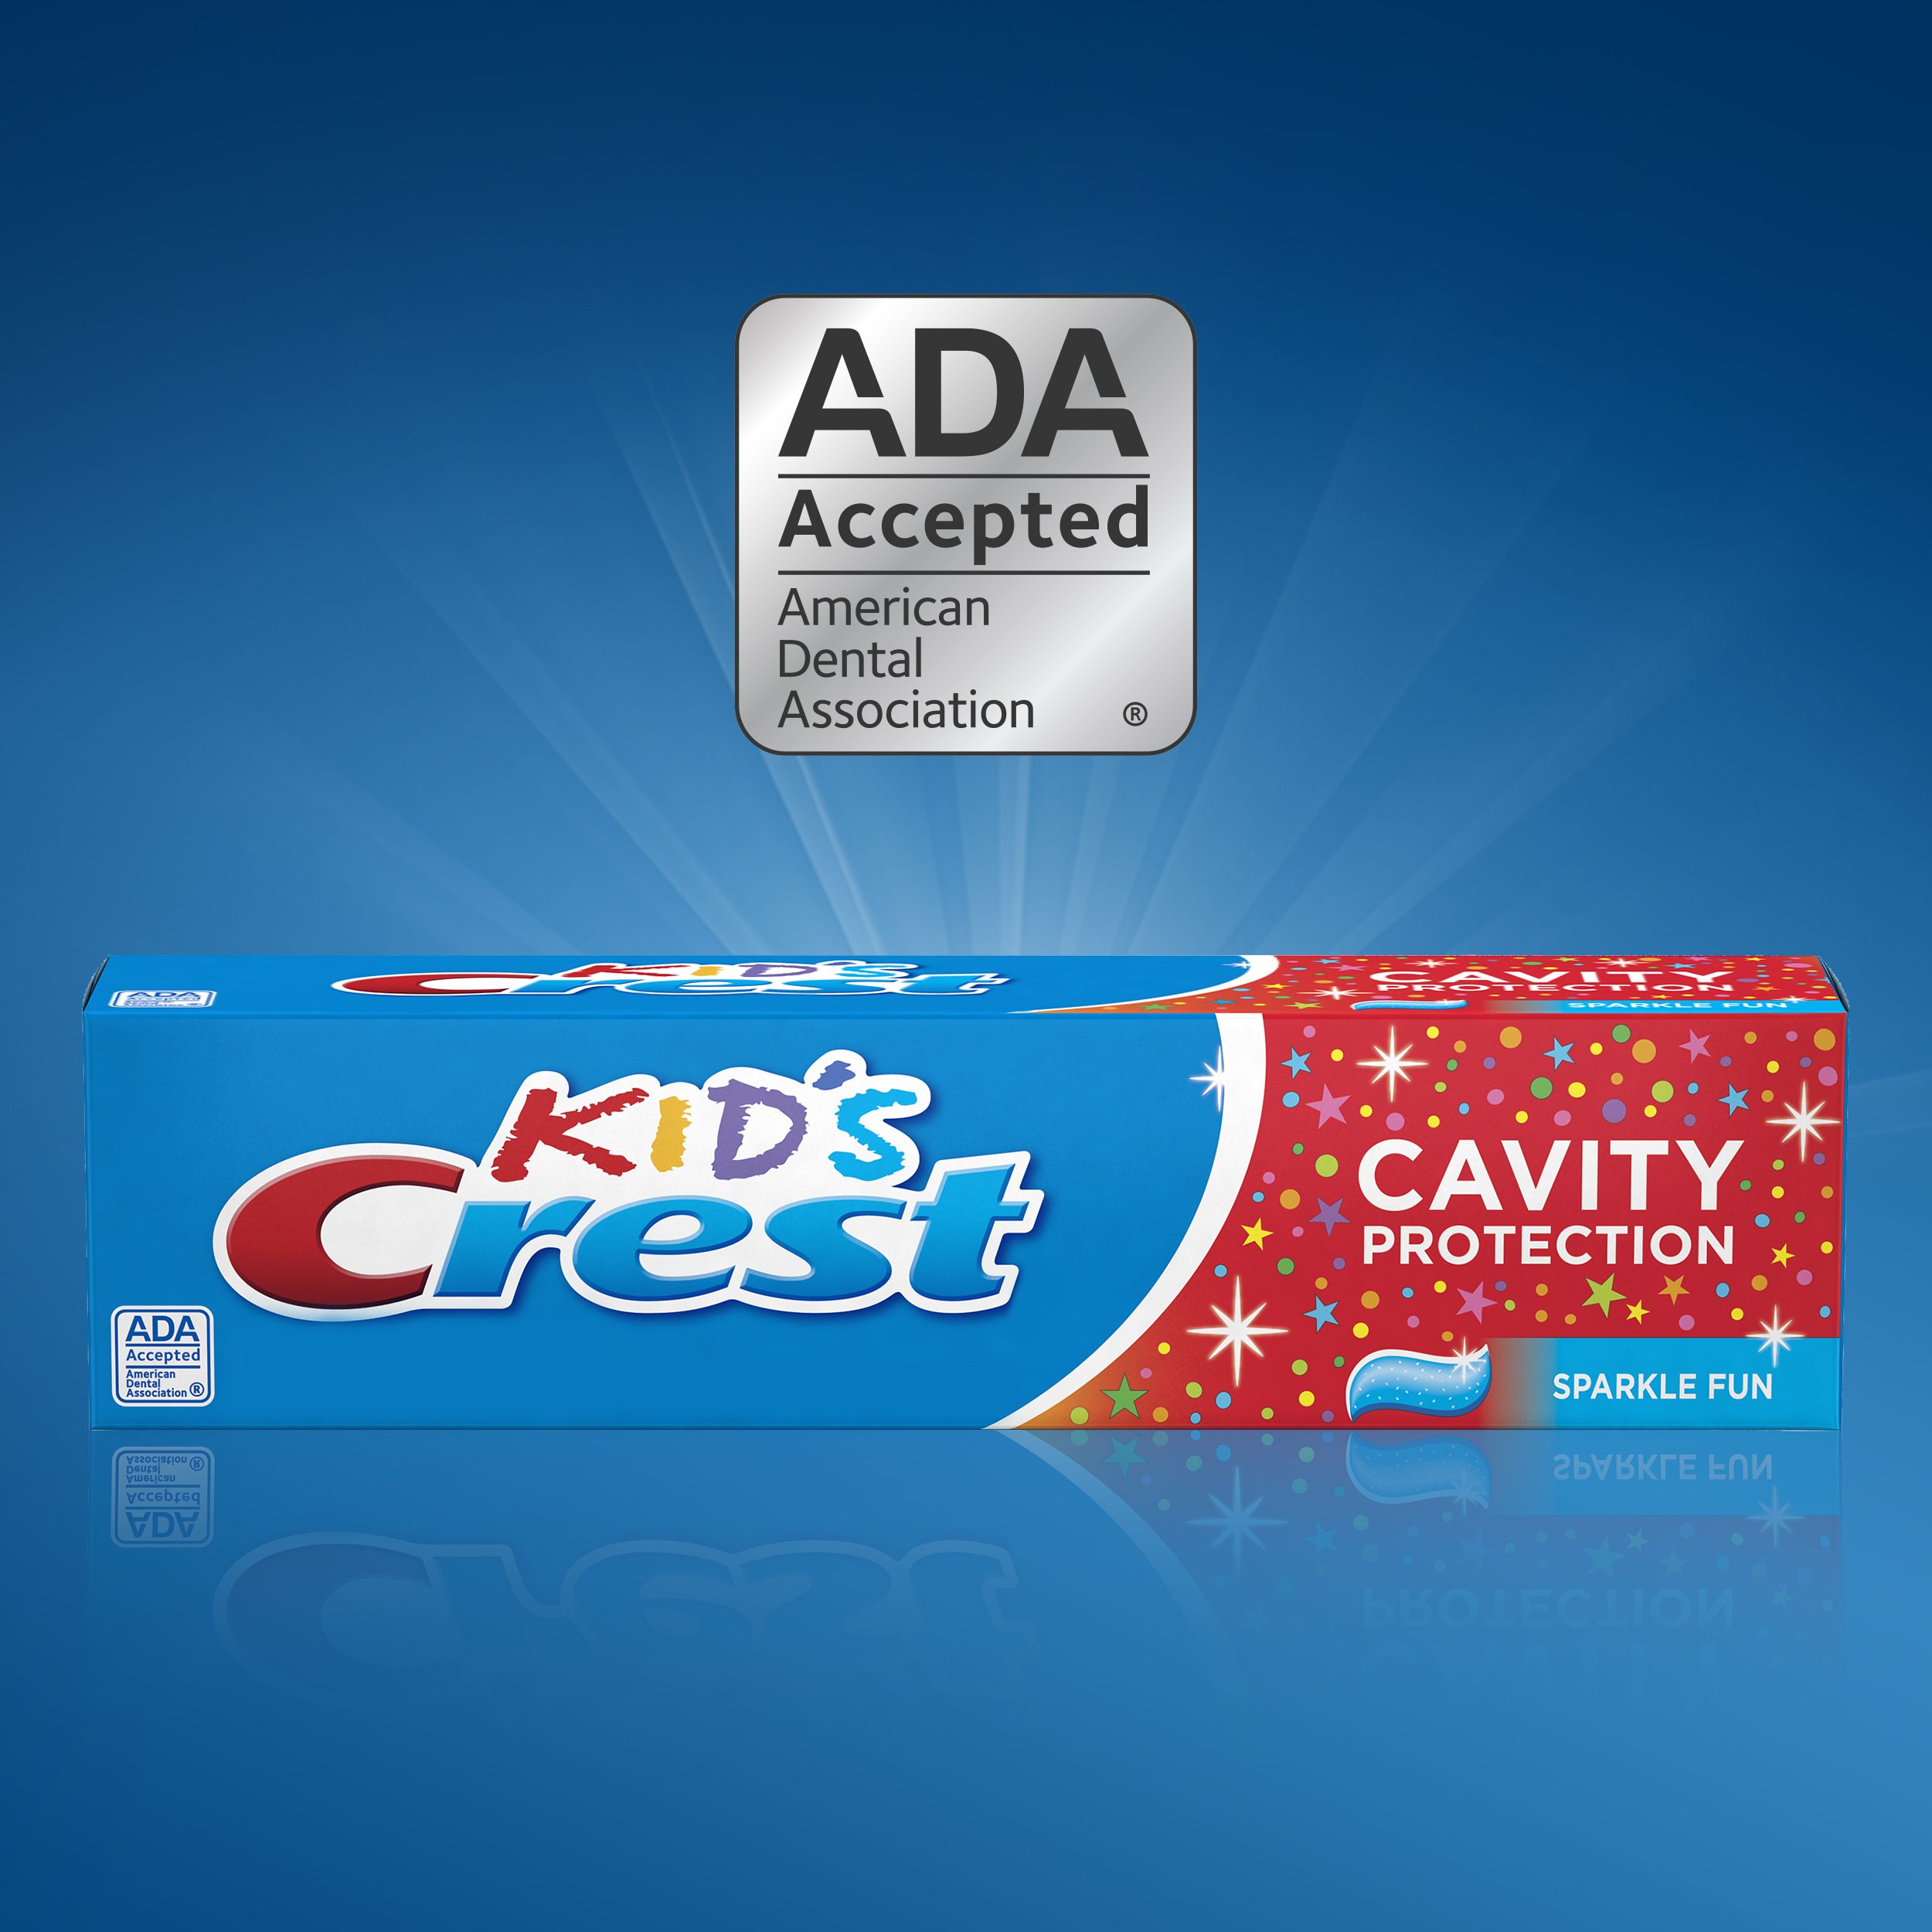 Crest Kid's Cavity Protection Toothpaste, Sparkle Fun Flavor, 4.6 oz, 2 Pack - image 7 of 7